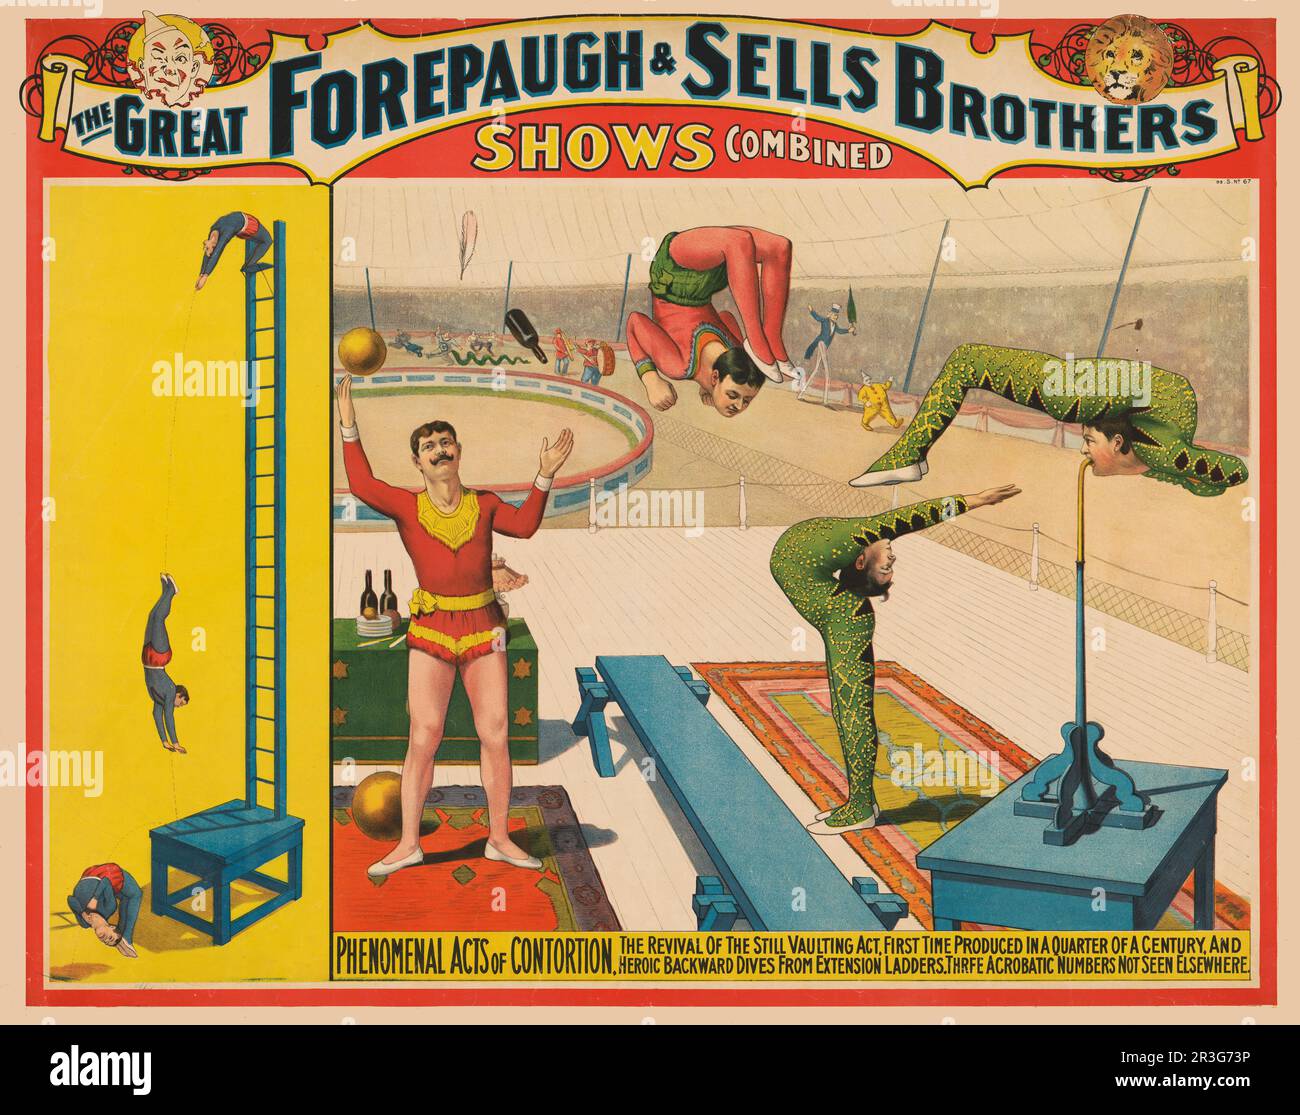 Vintage Adam Forepaugh and Sells Brothers circus poster showing a juggler and contortionists performing acts, circa 1899. Stock Photo